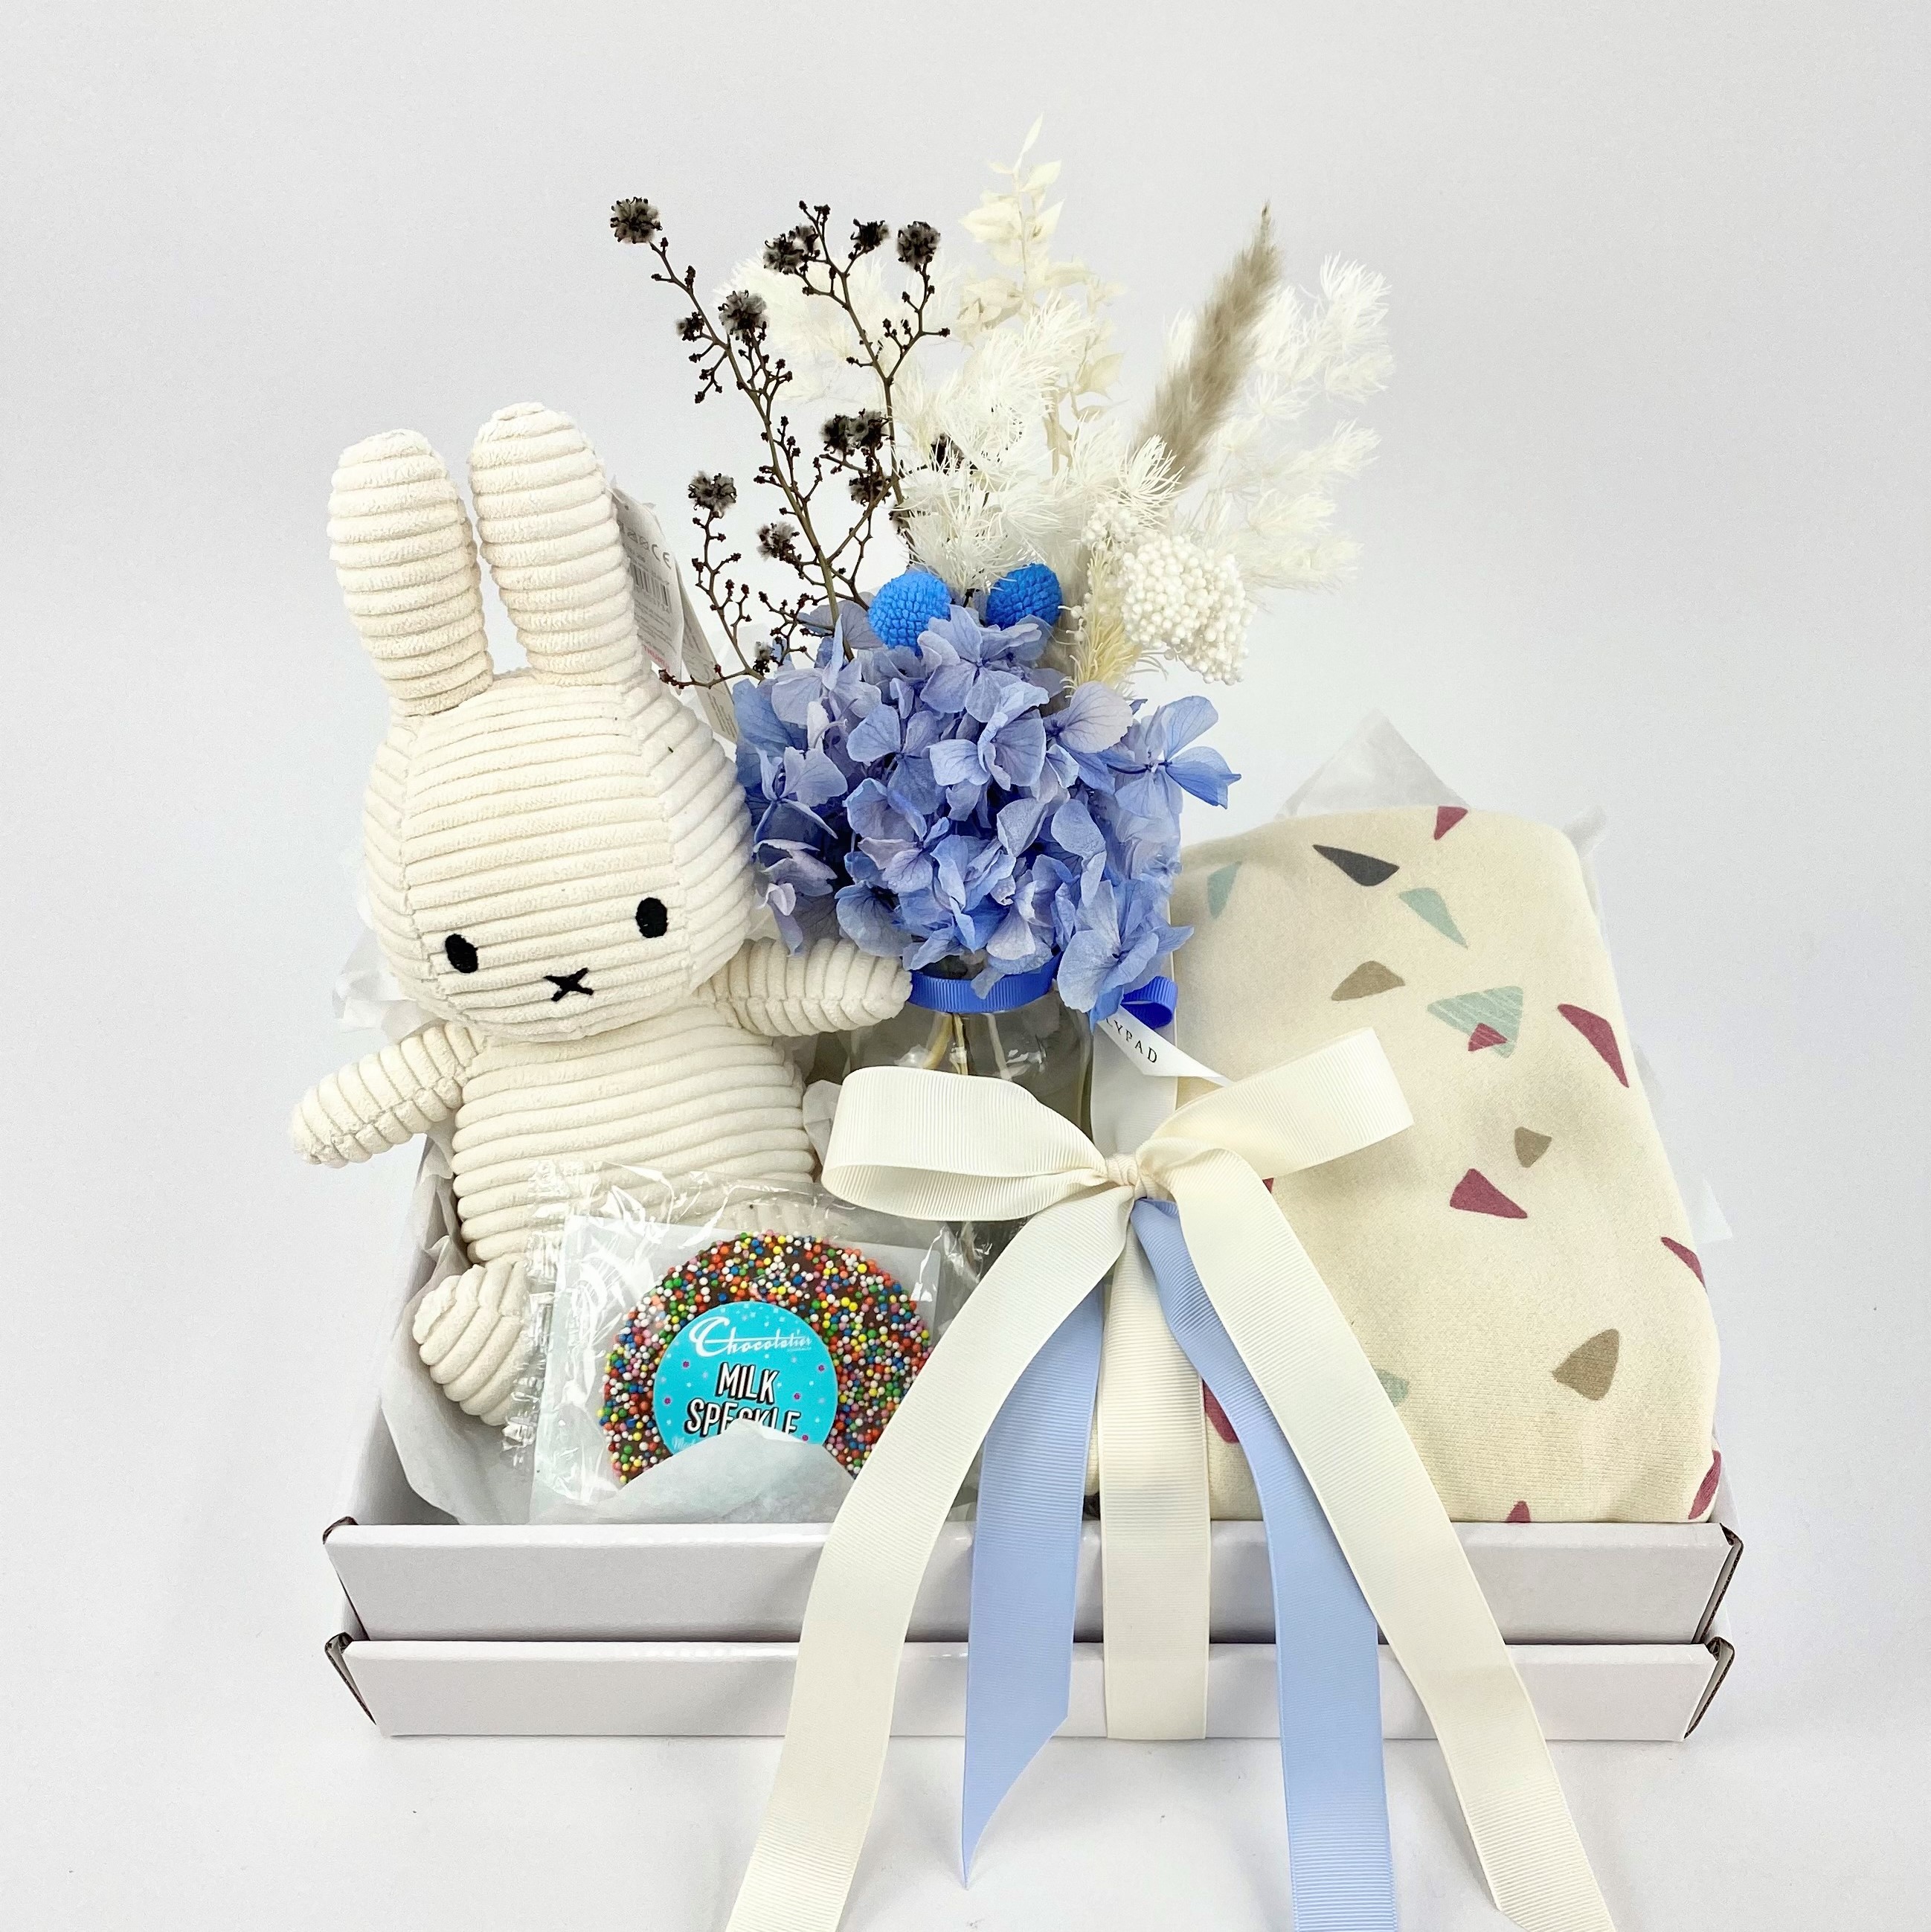 Gift hamper for new baby boy with baby blanket, preserved flowers in vase and miffy bunny with chocolate.